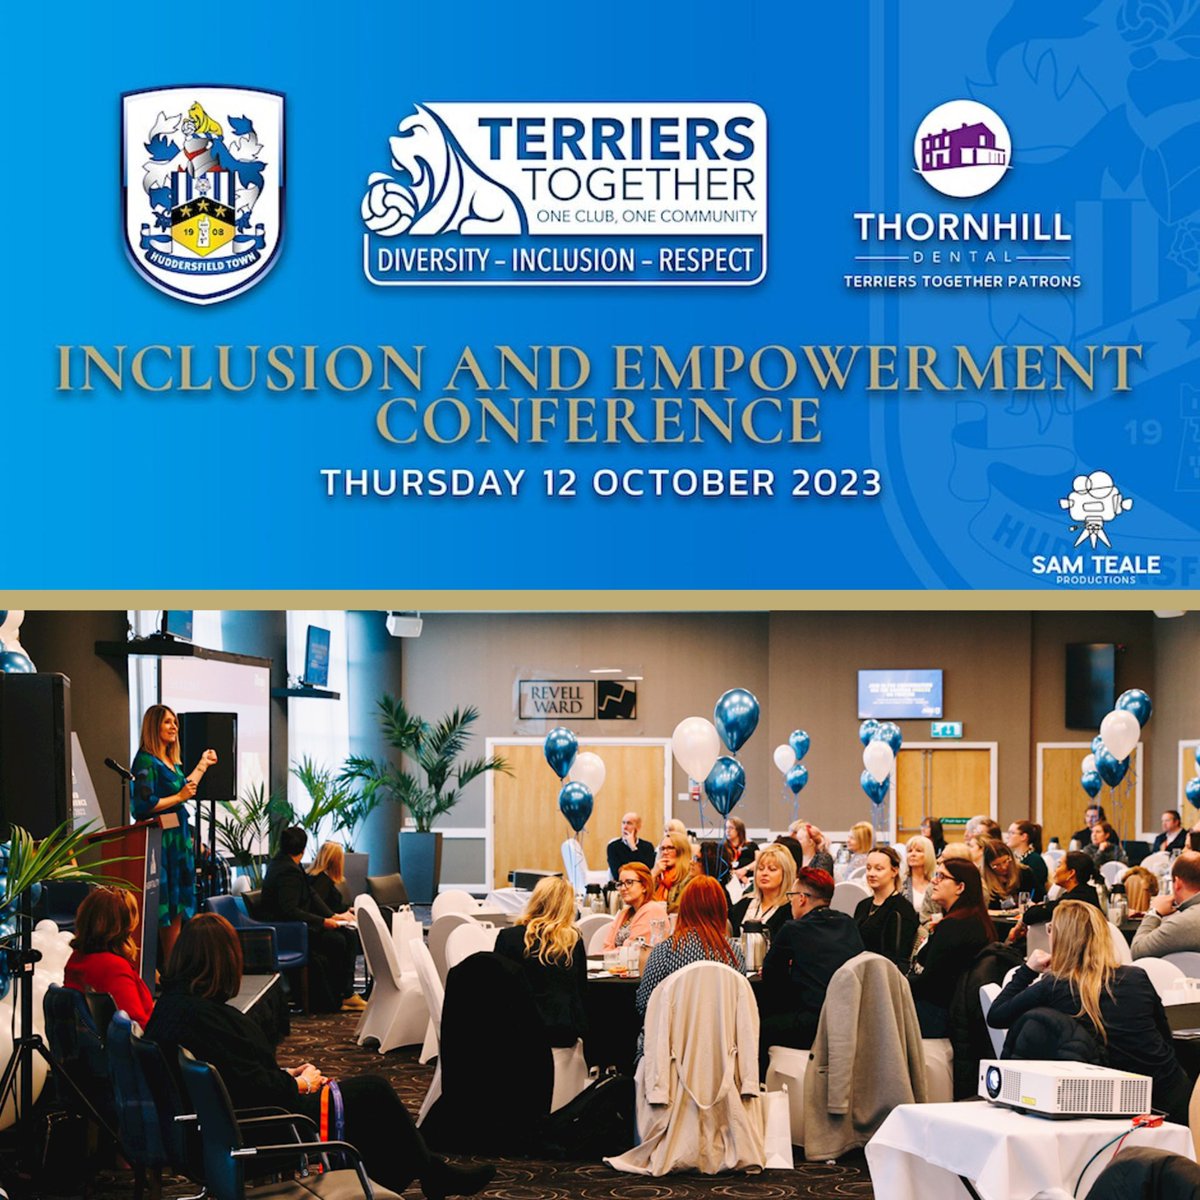 Tomorrow is @htafc’s Inclusion & Empowerment conference! 🔵⚪️

We’re thrilled to be sponsors and eagerly anticipate supporting this event. As dedicated patrons of Huddersfield Town’s #TerriersTogether initiative, we jumped at the chance to sponsor this conference.